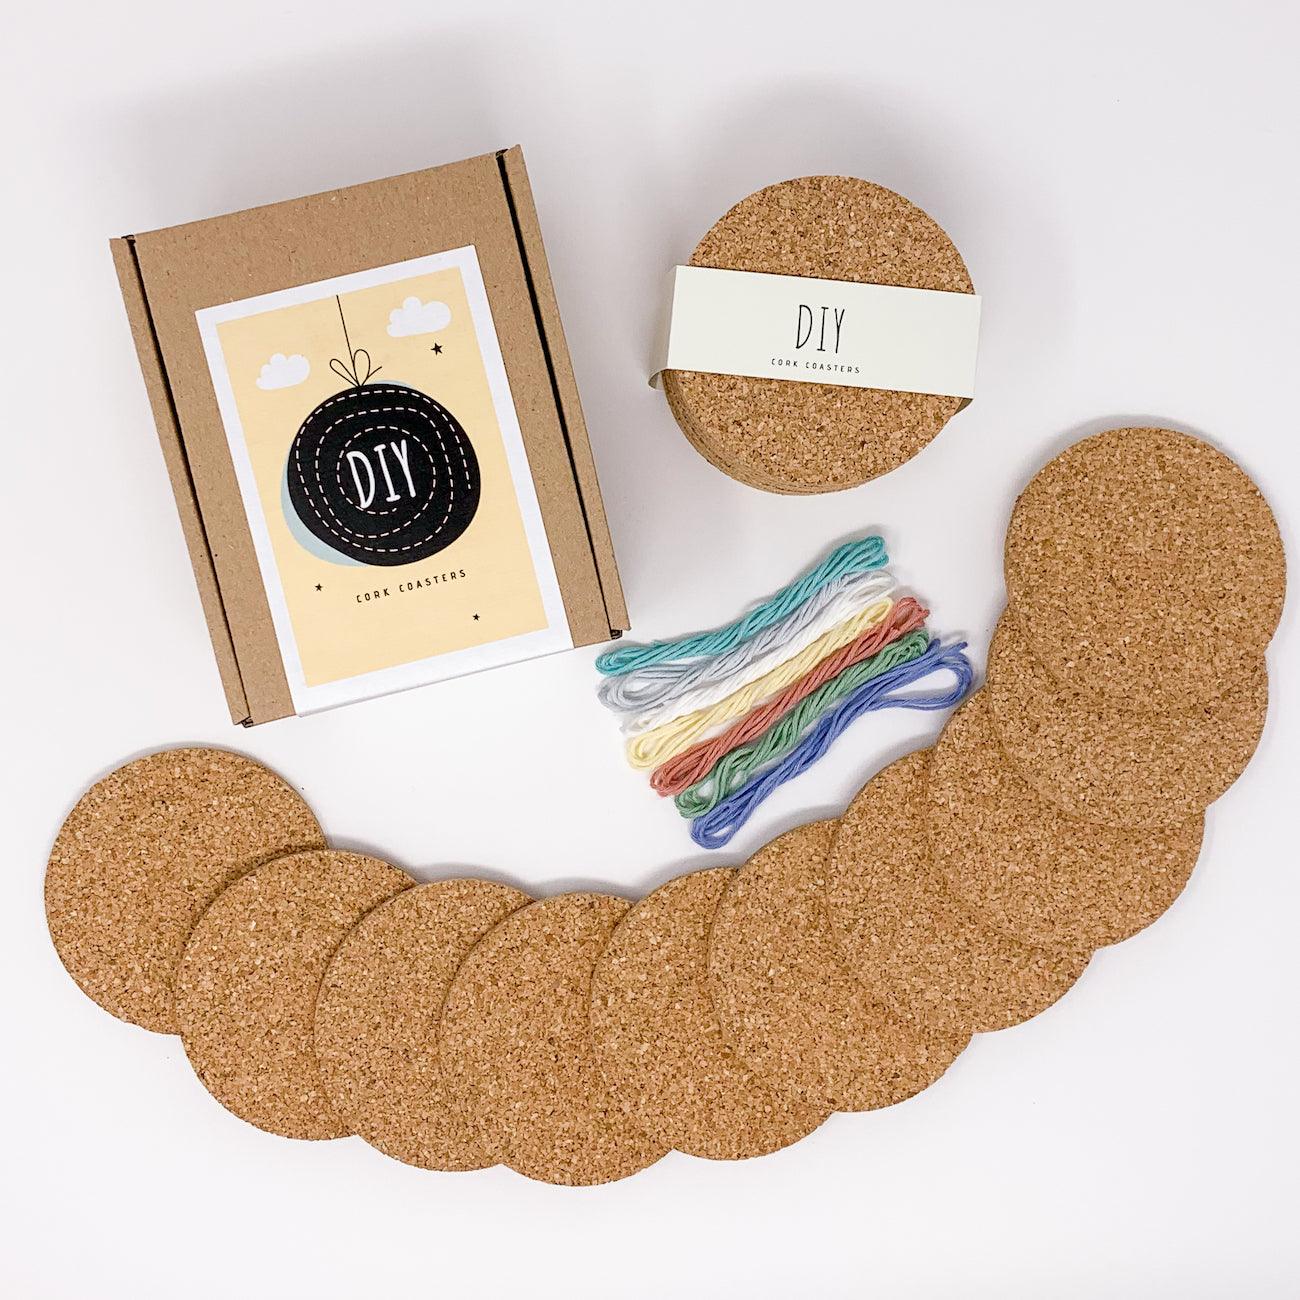 Buy perfect creative gift idea for wedding, birthday, for kids and adults &#8211; DIY cork coaster set